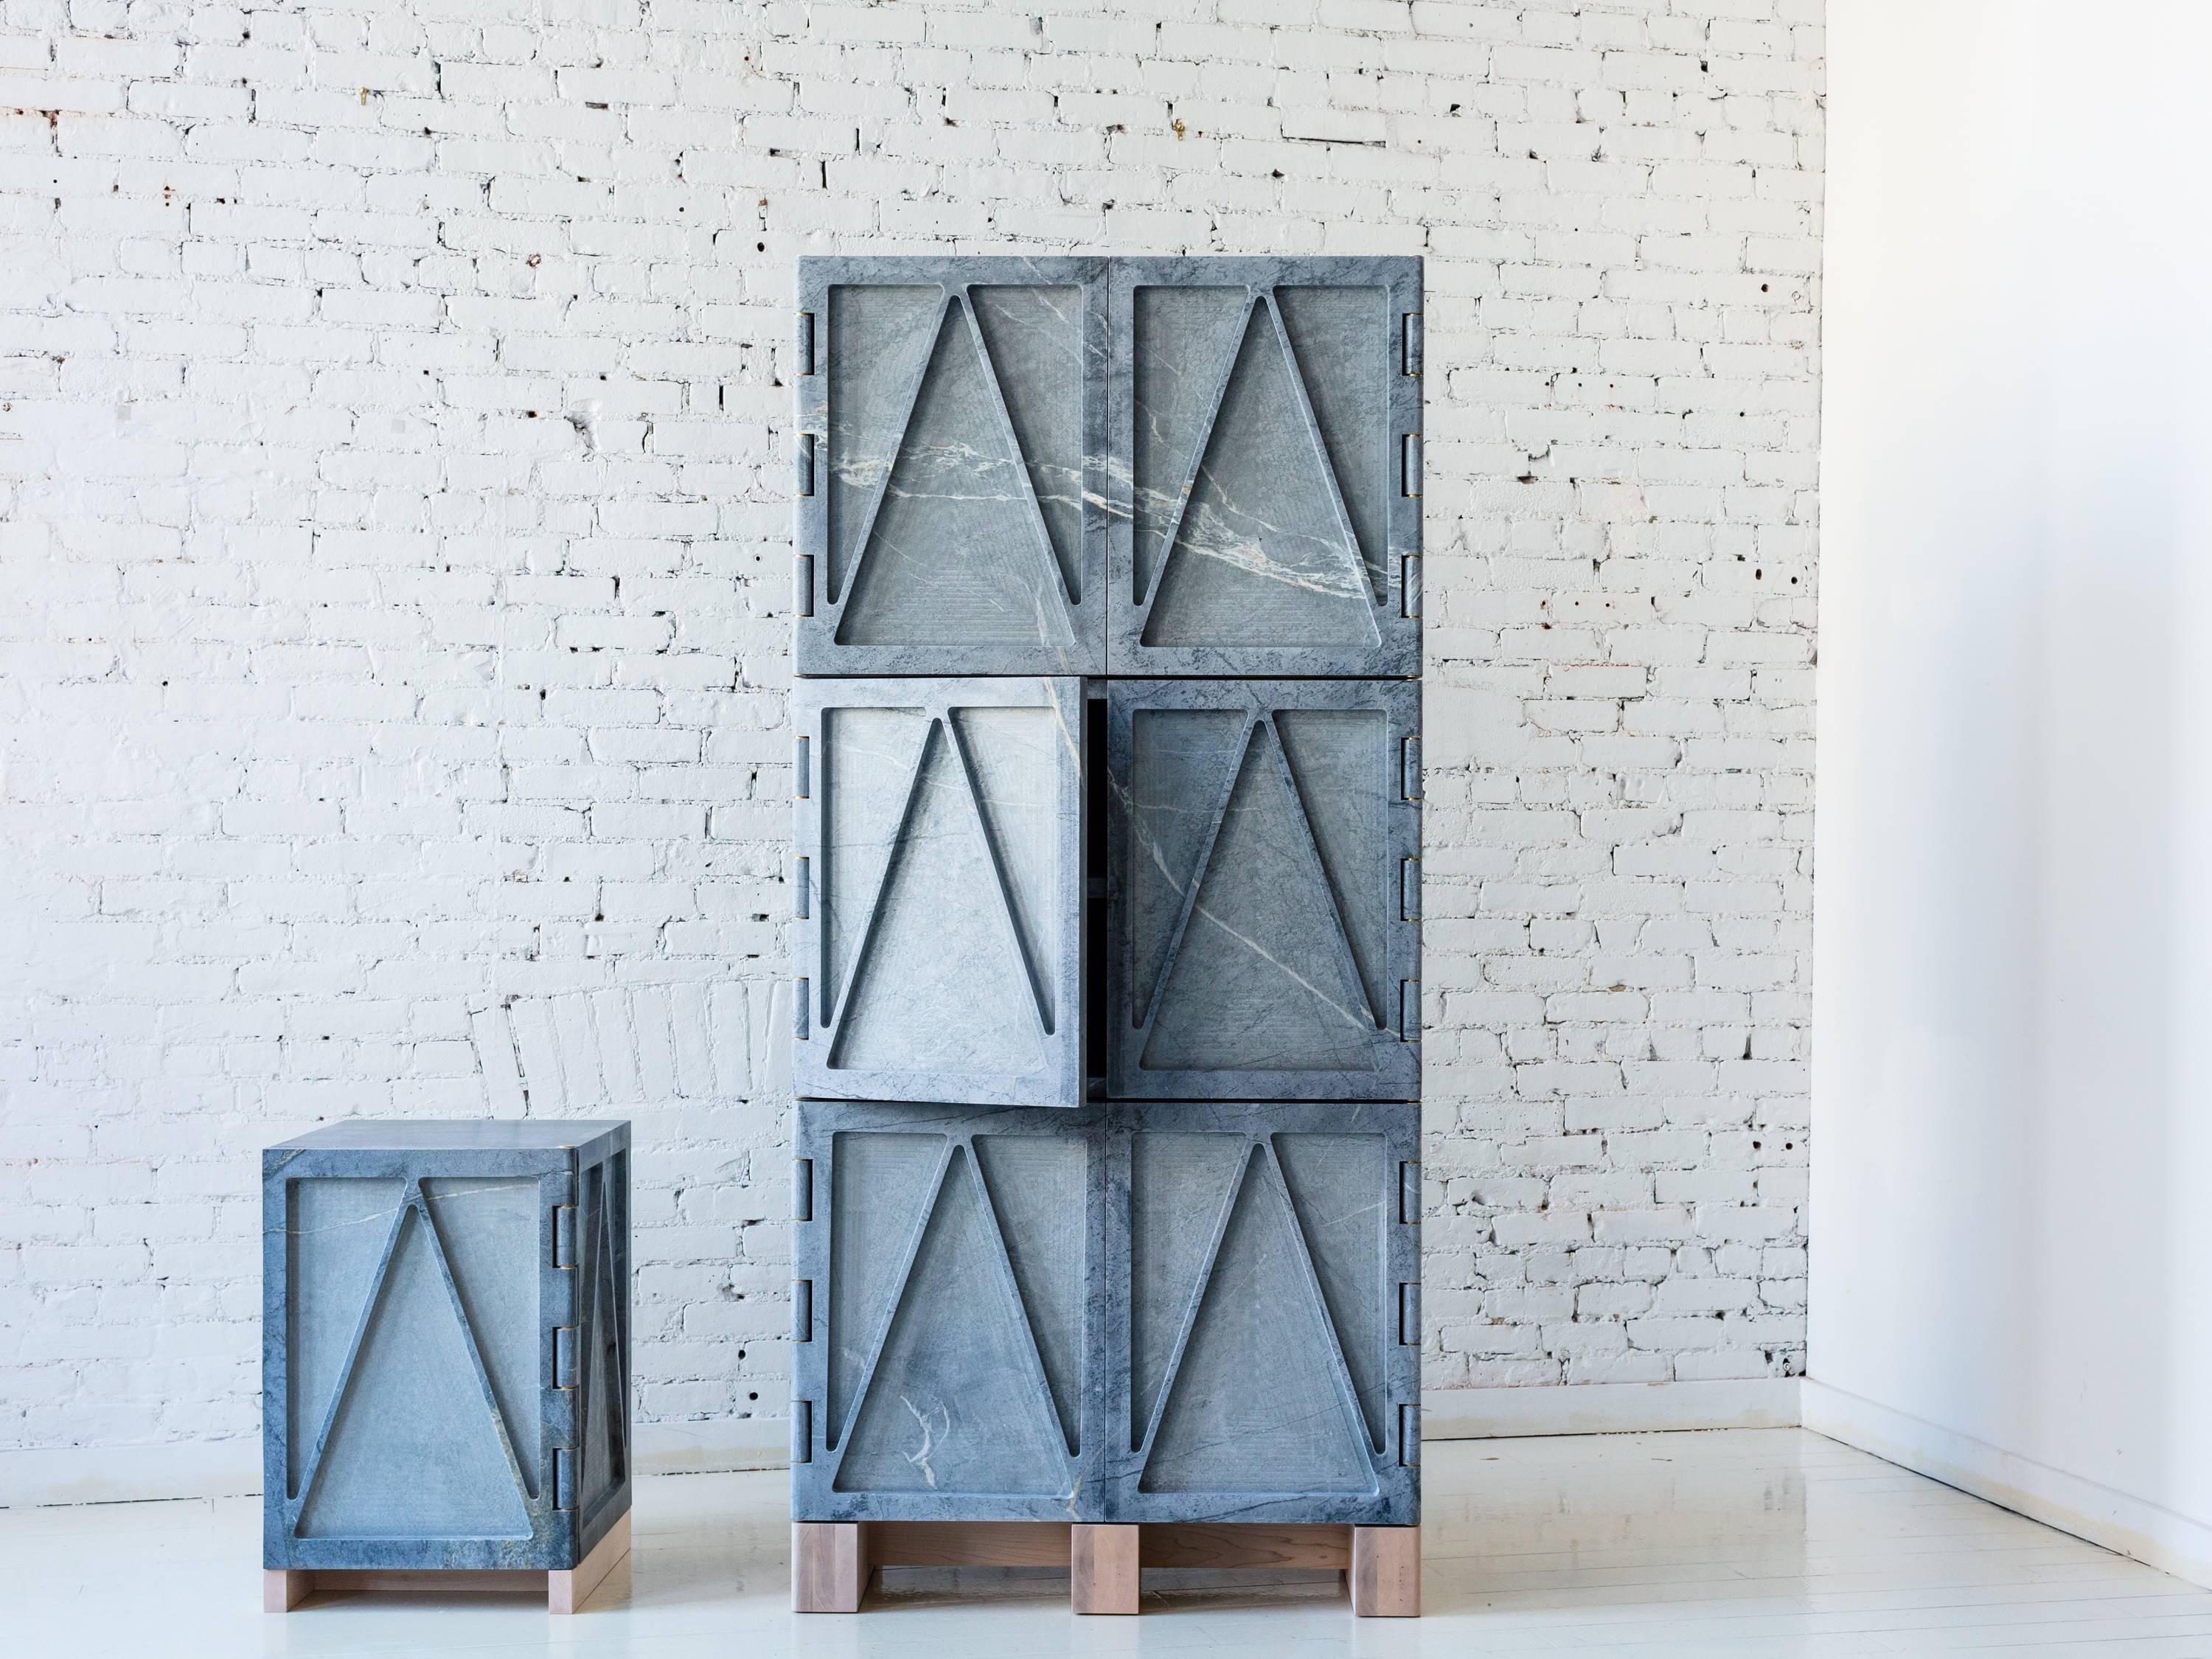 A part of Fort Standard’s collection, “Qualities of Material”, this stone cabinet has a triangular relief pattern milled into the exterior panels, which removes excess weight and allows the remaining ribs to retain the material’s strength. The